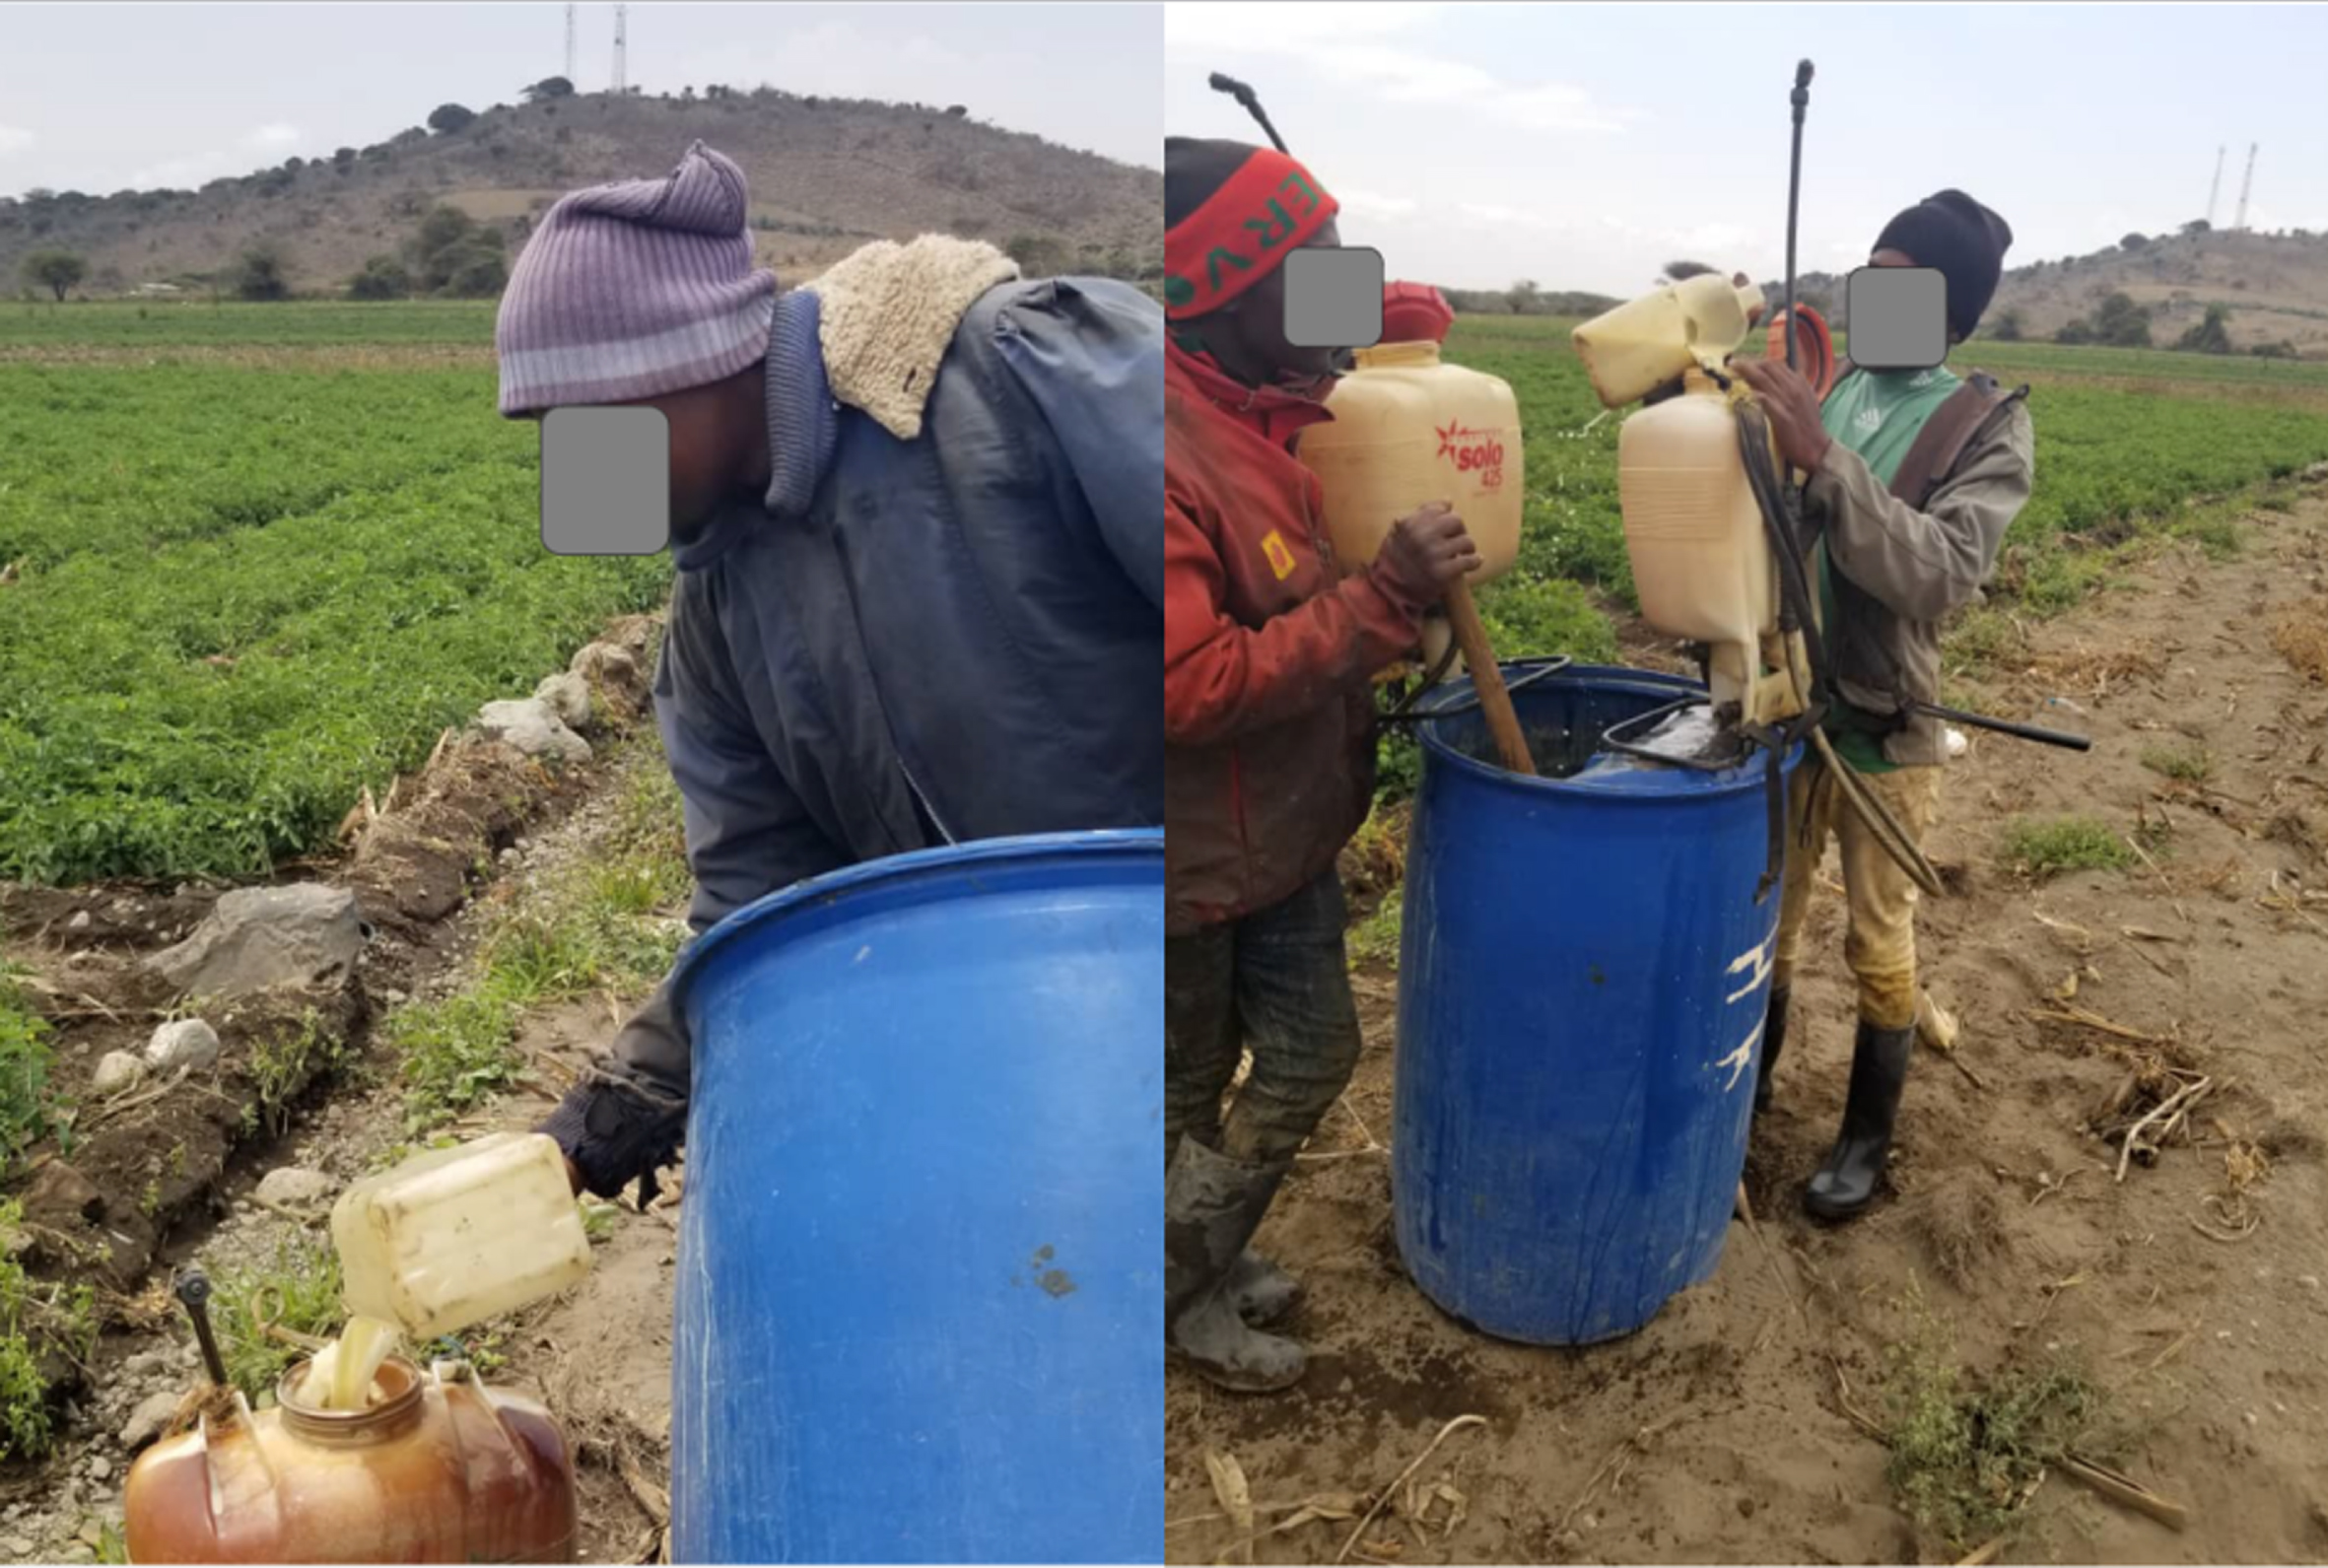 Tanzanian farmers using pesticides (photo with permission of depicted individuals, RJ Mwezi).